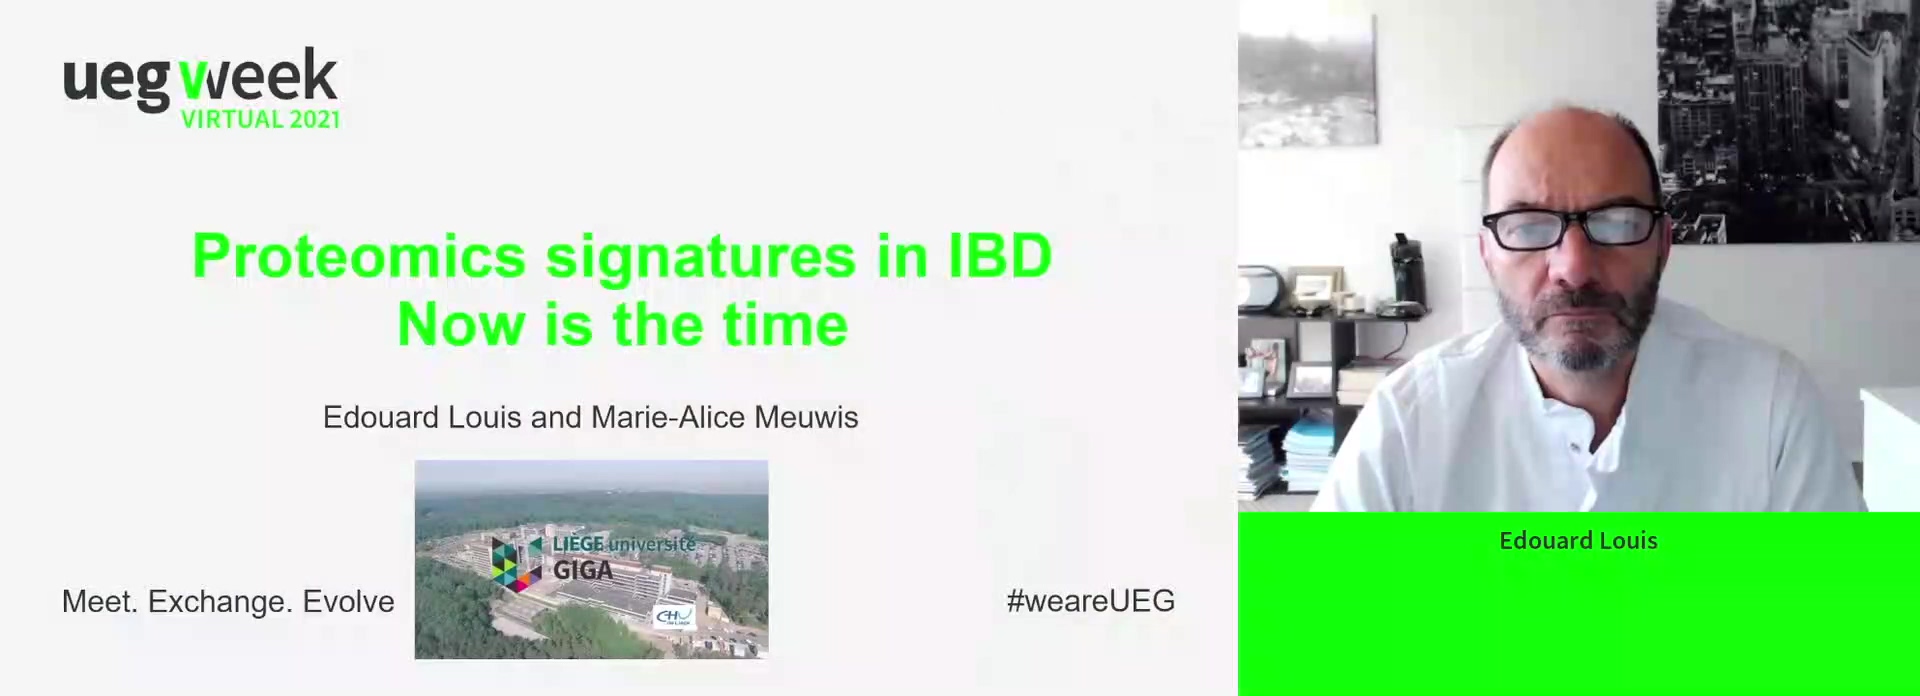 Proteomics signatures in IBD: Now is the time